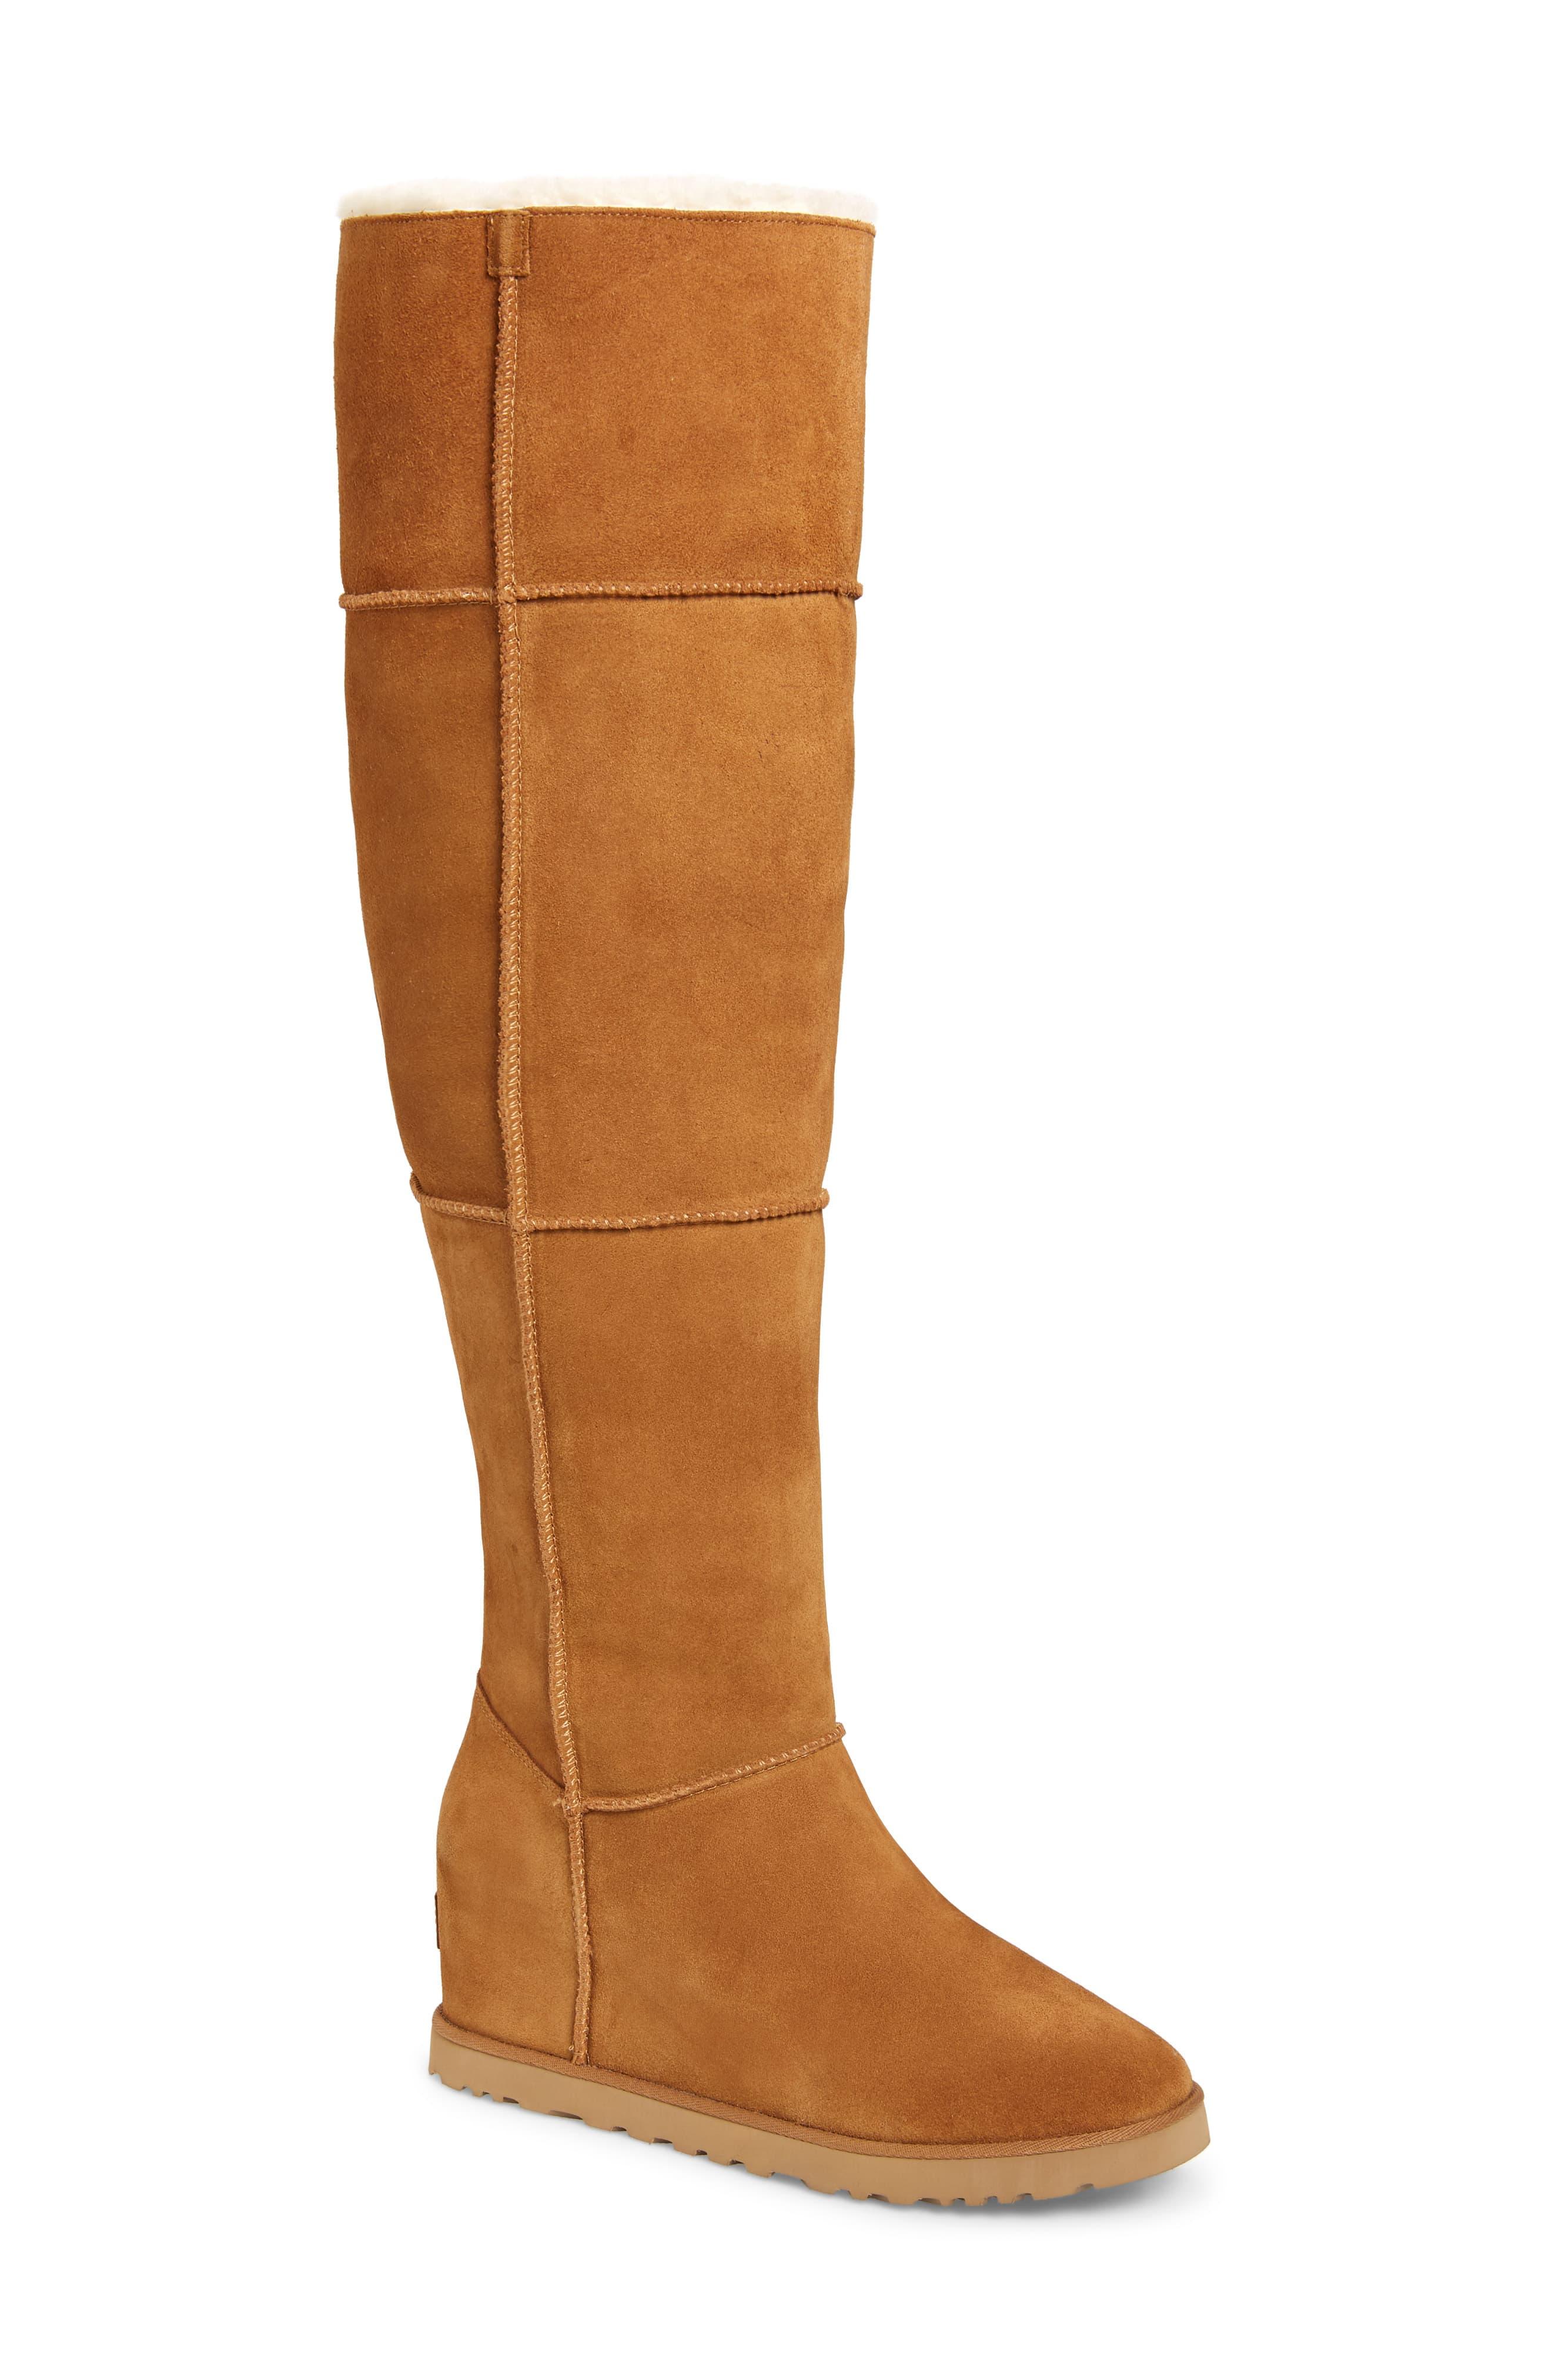 ugg classic femme over the knee